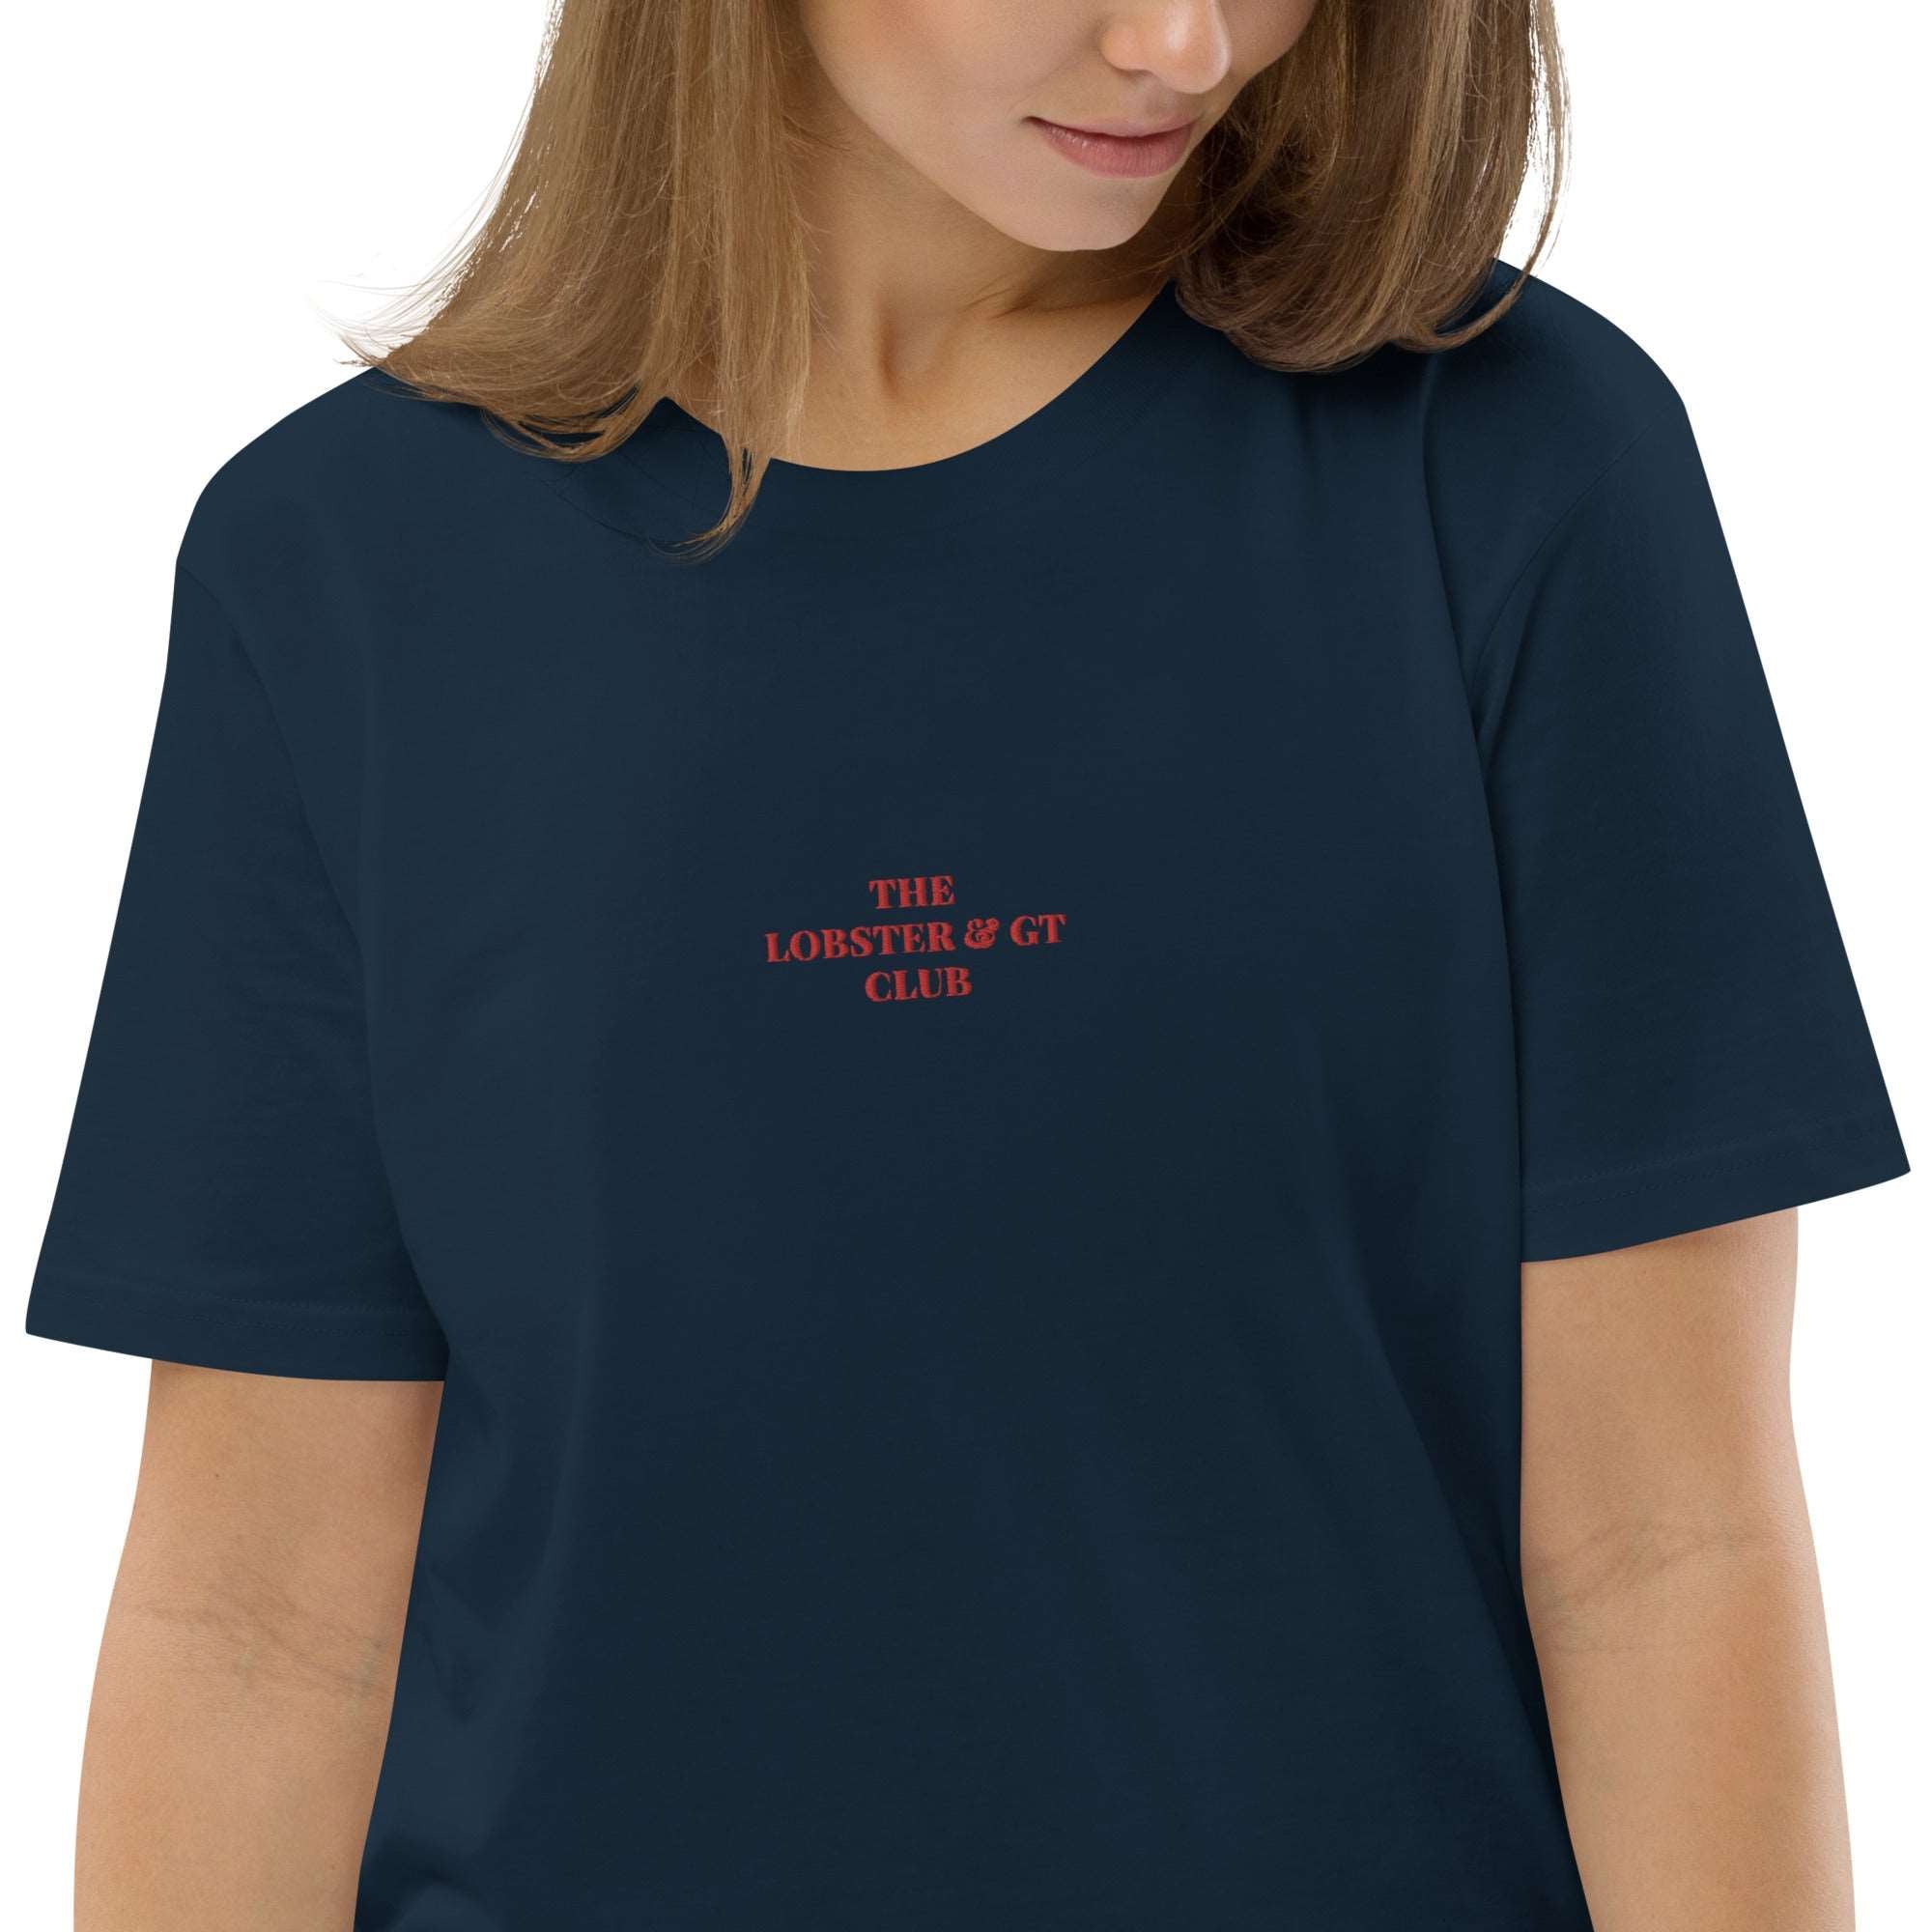 The Lobster & GT Club - Organic Embroidered T-shirt - The Refined Spirit